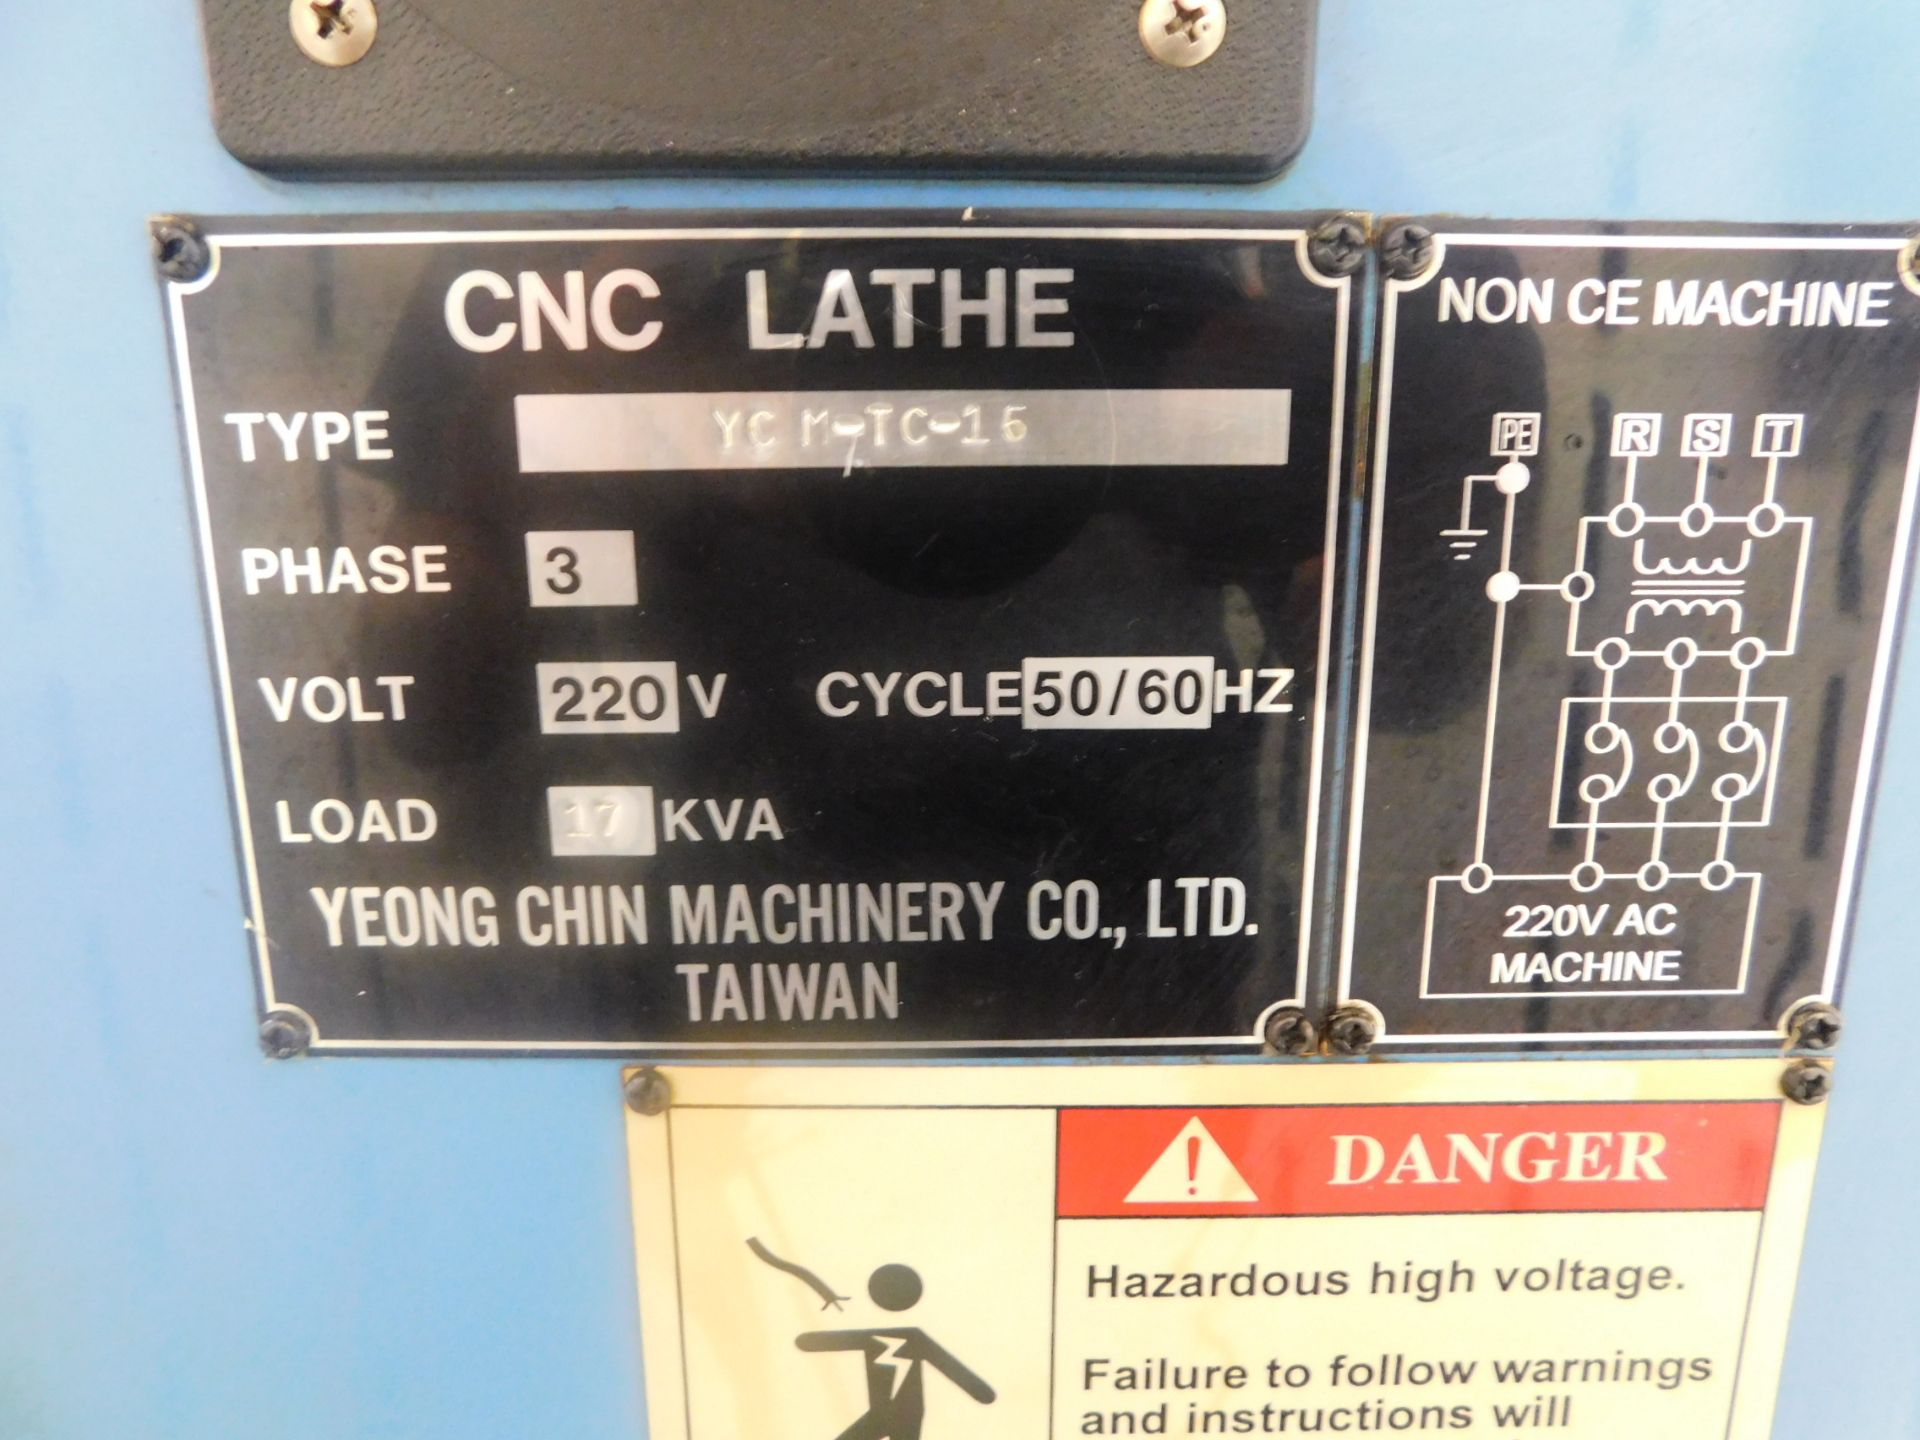 Supermax Model YCM-TC-15 CNC Turning Center, SN 025028, with Fanuc Series O-T CNC Control, 8" 3- - Image 6 of 13